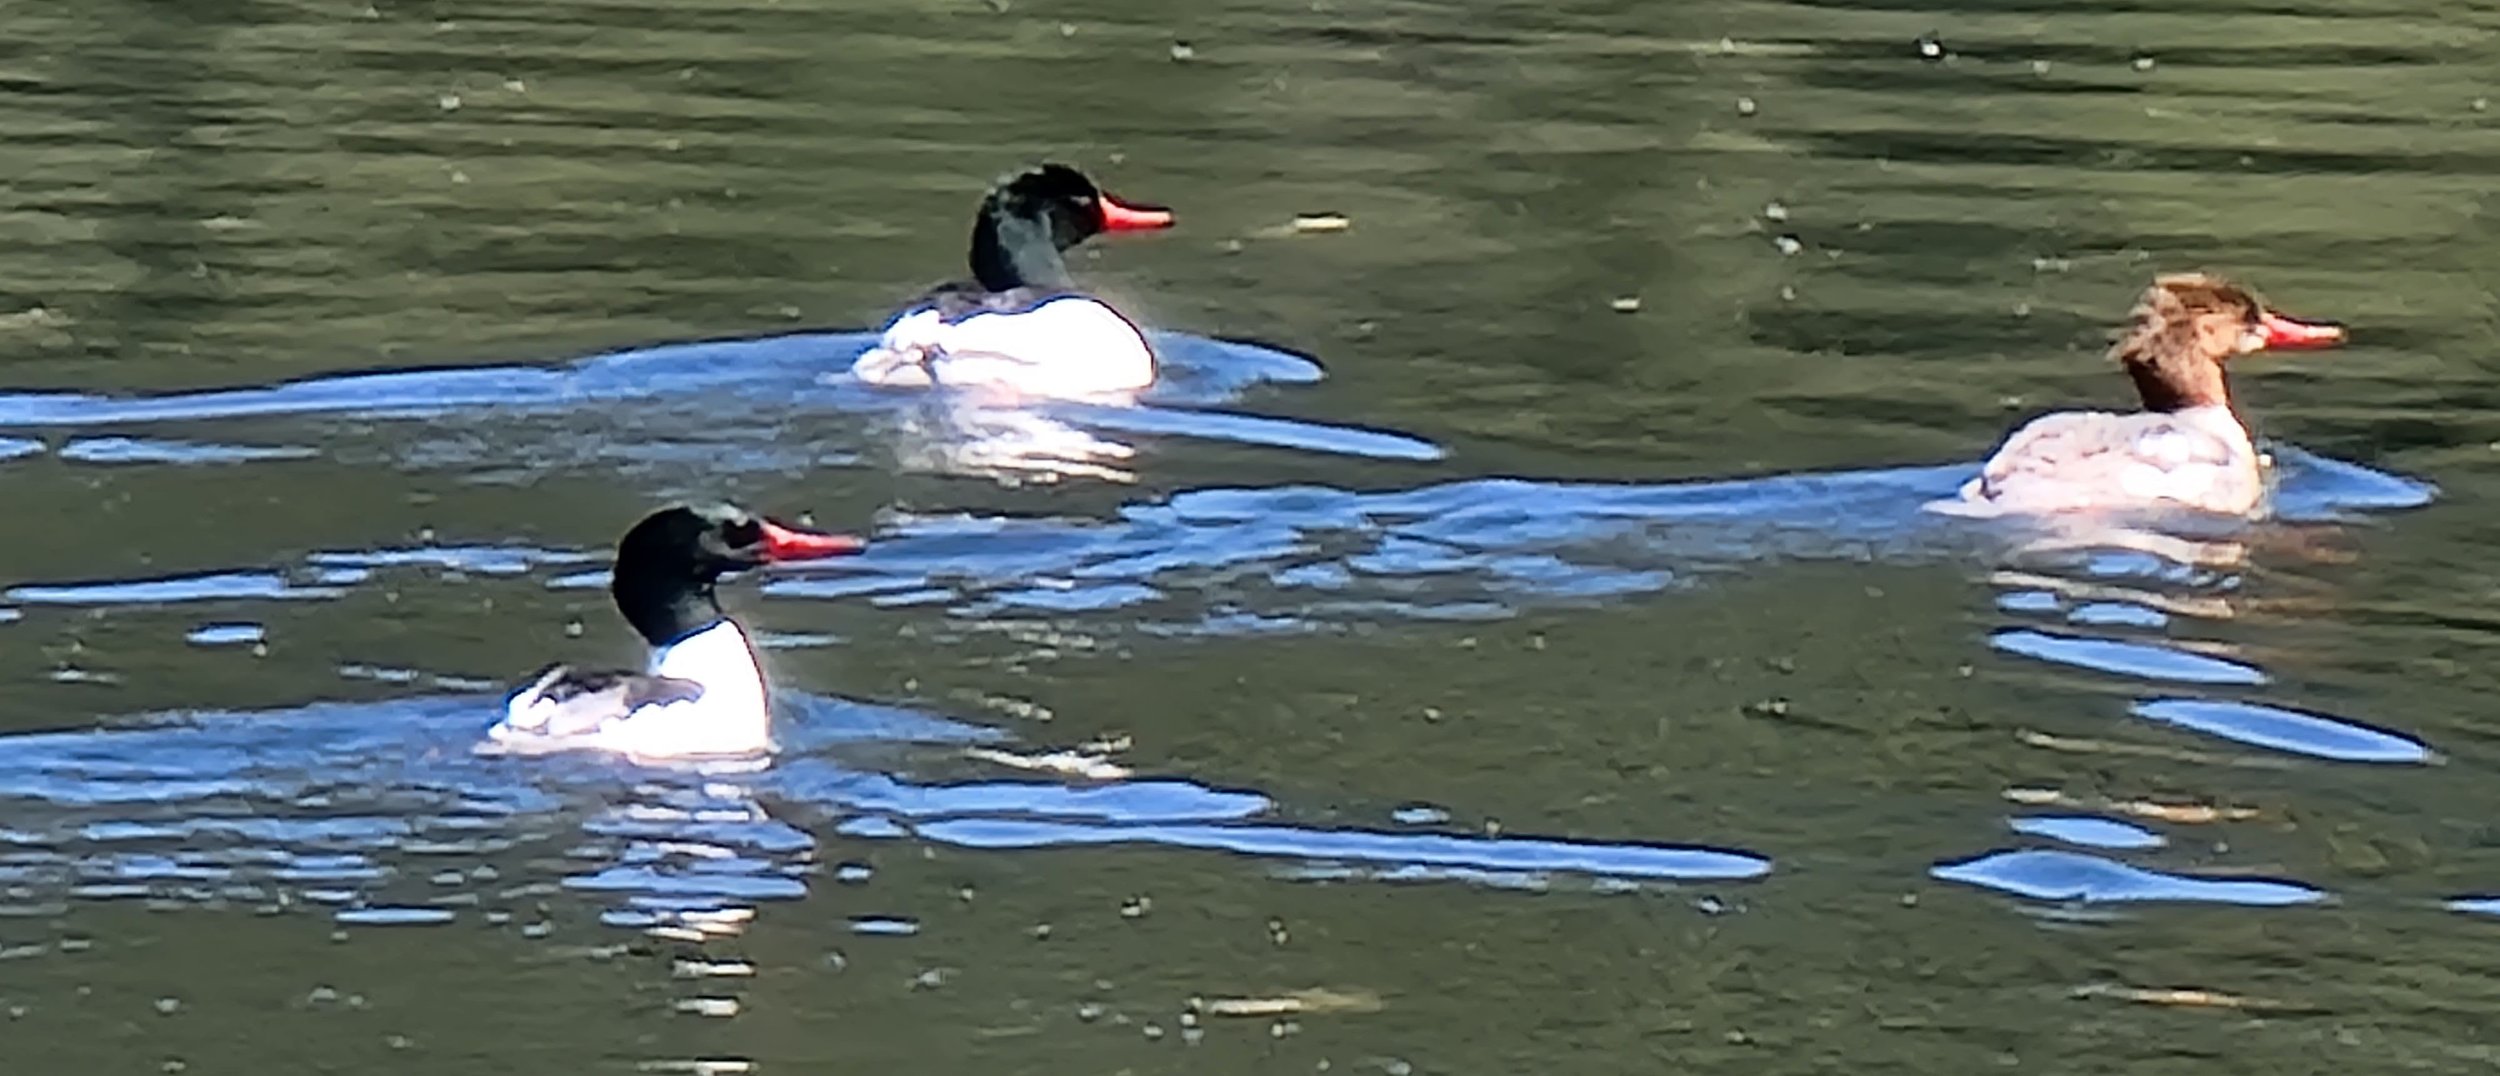 50x zoom. Common Merganser. These dive down to eat little fishies. Green head = Male, brown head = females.